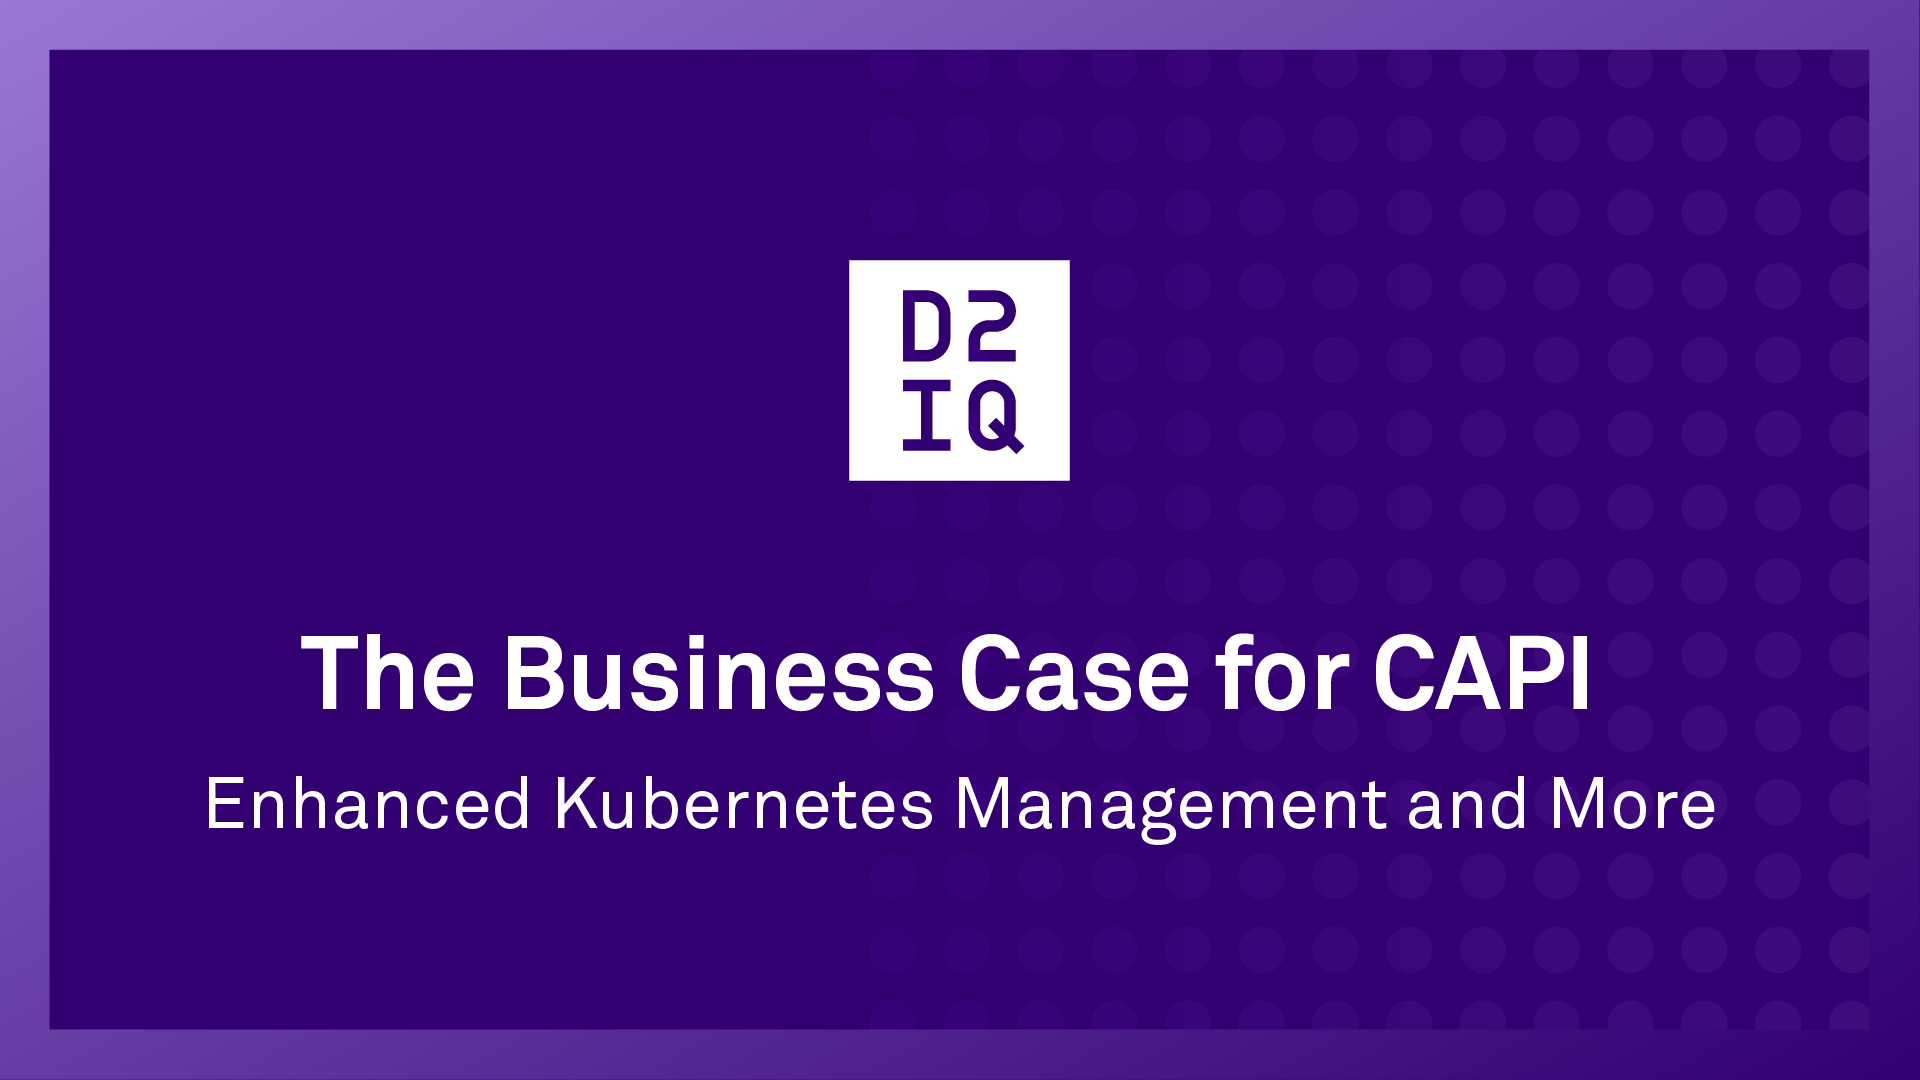 The Business Case for CAPI: Enhanced Kubernetes Management and More